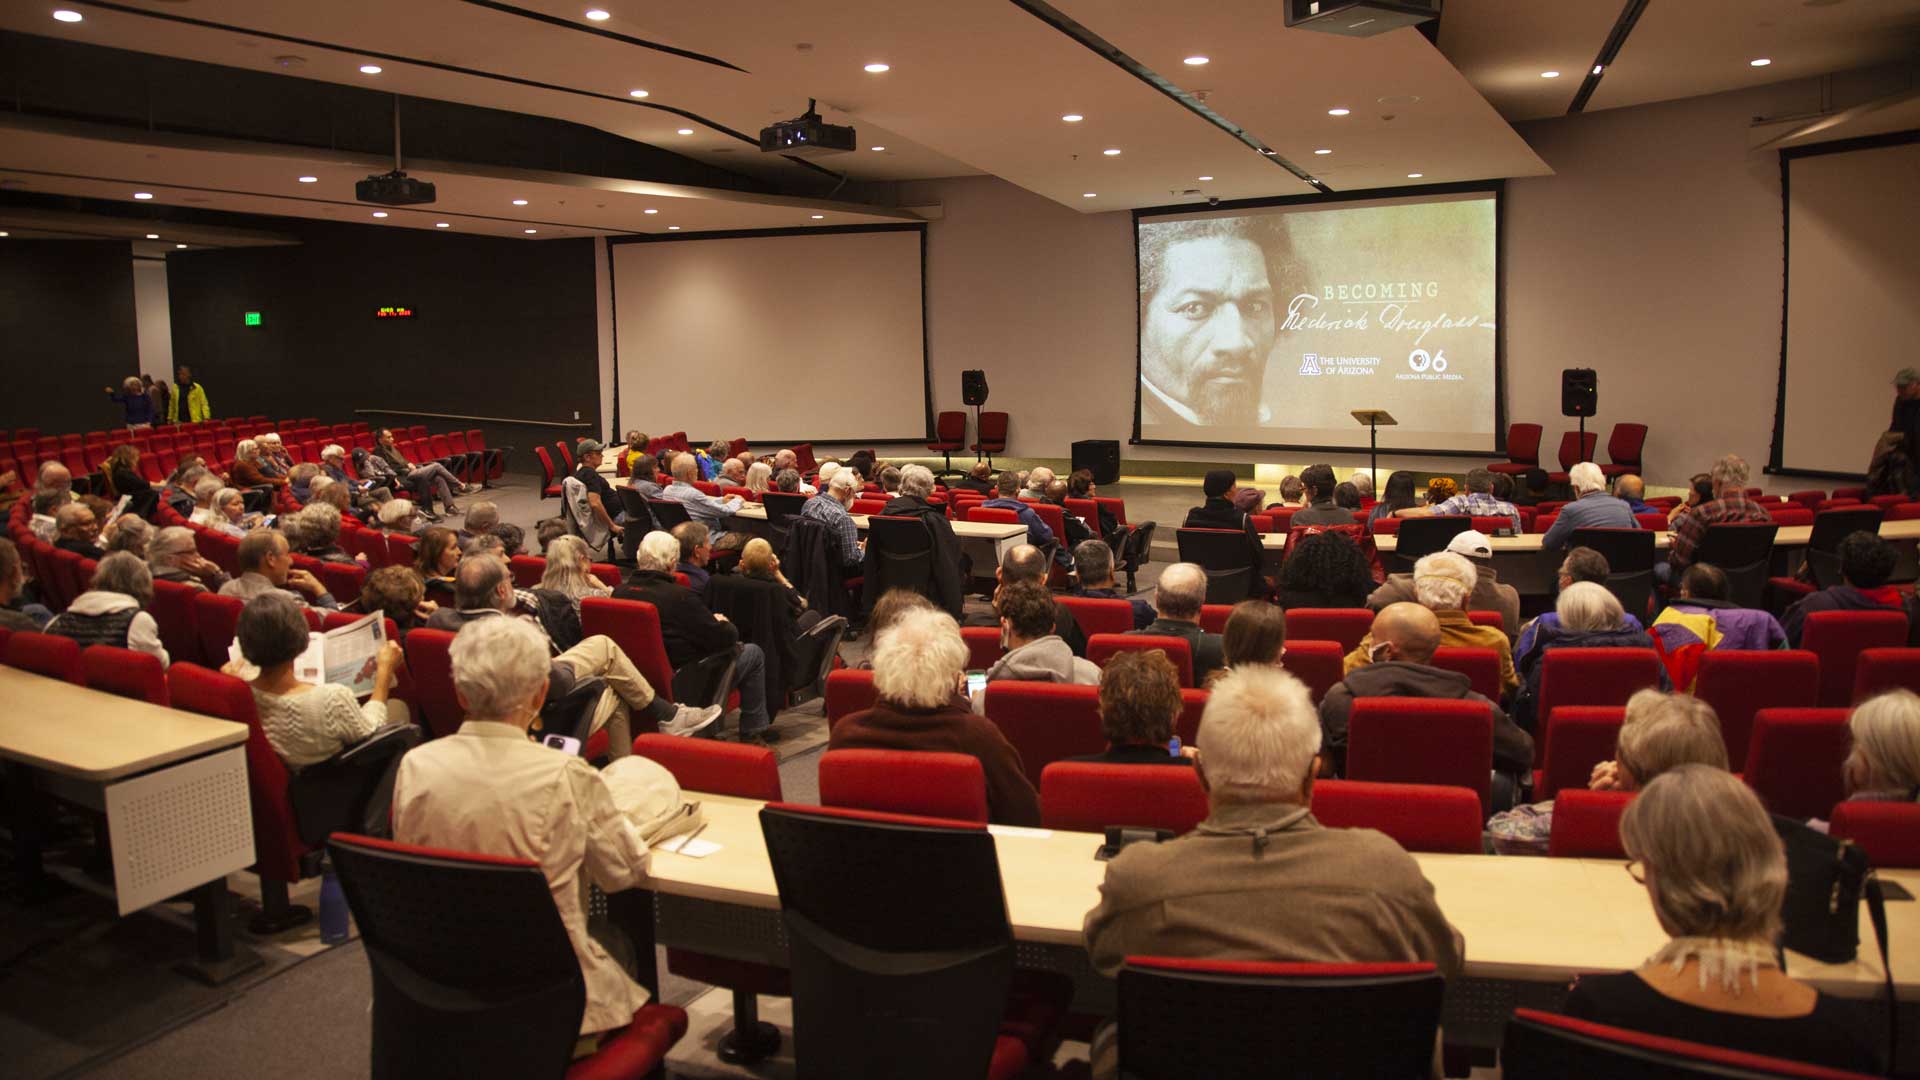 Becoming Frederick Douglass Screening and Panel Discussion